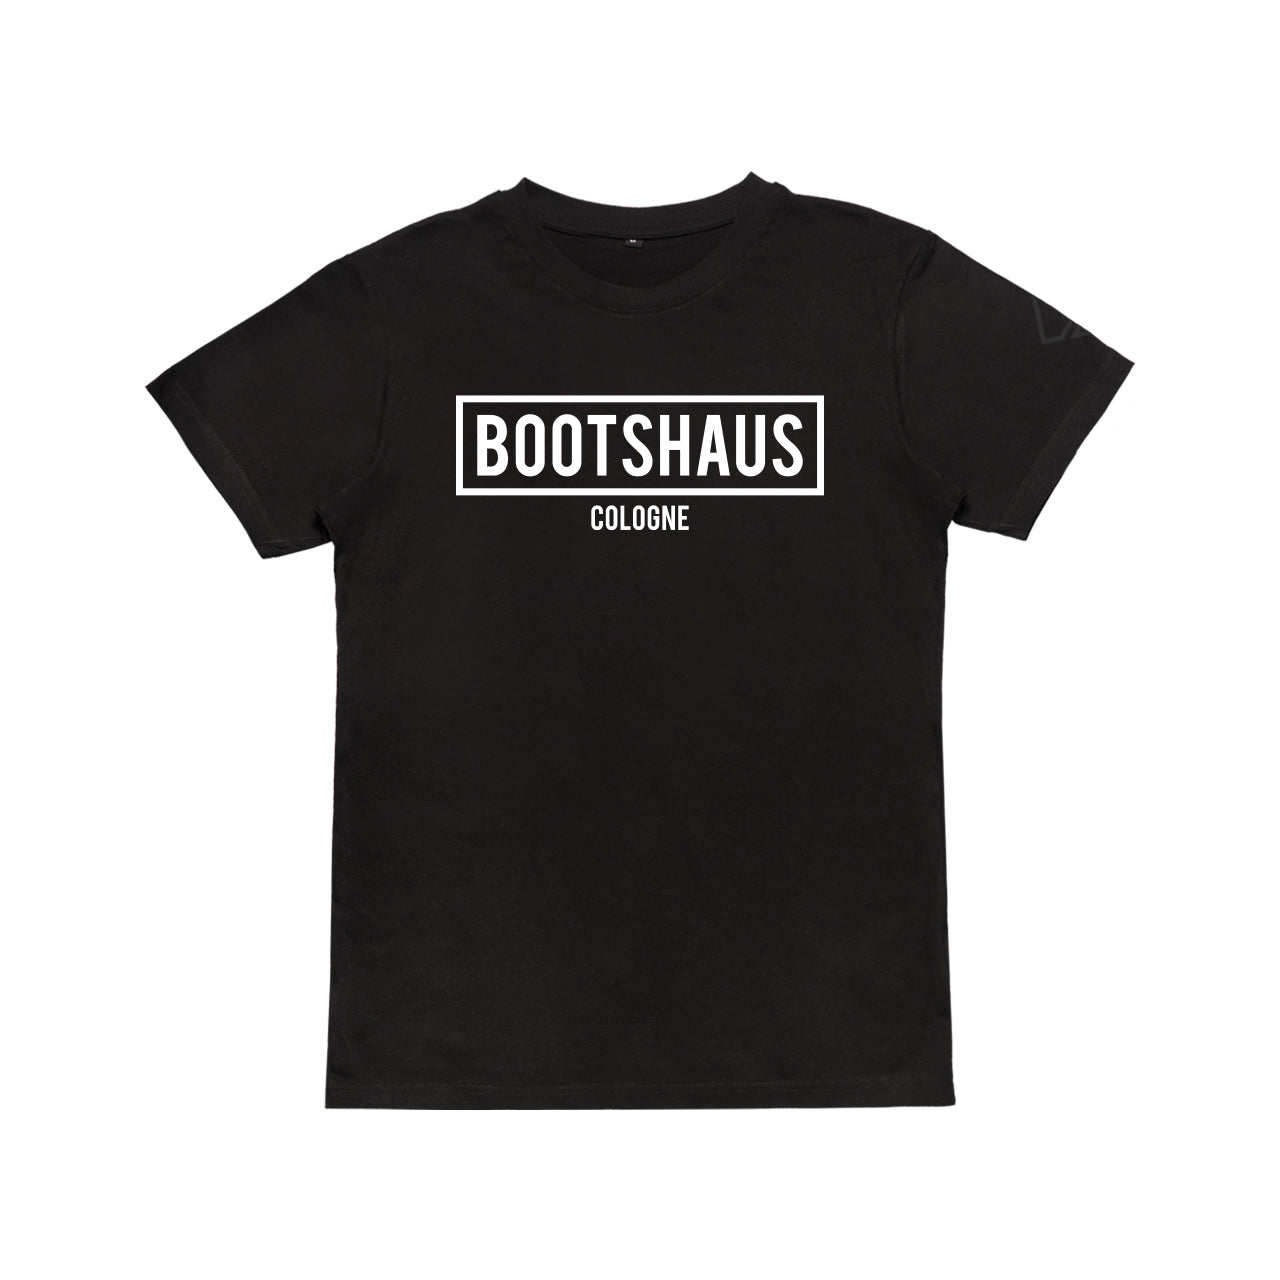 Bootshaus - All Time Classic T-Shirt